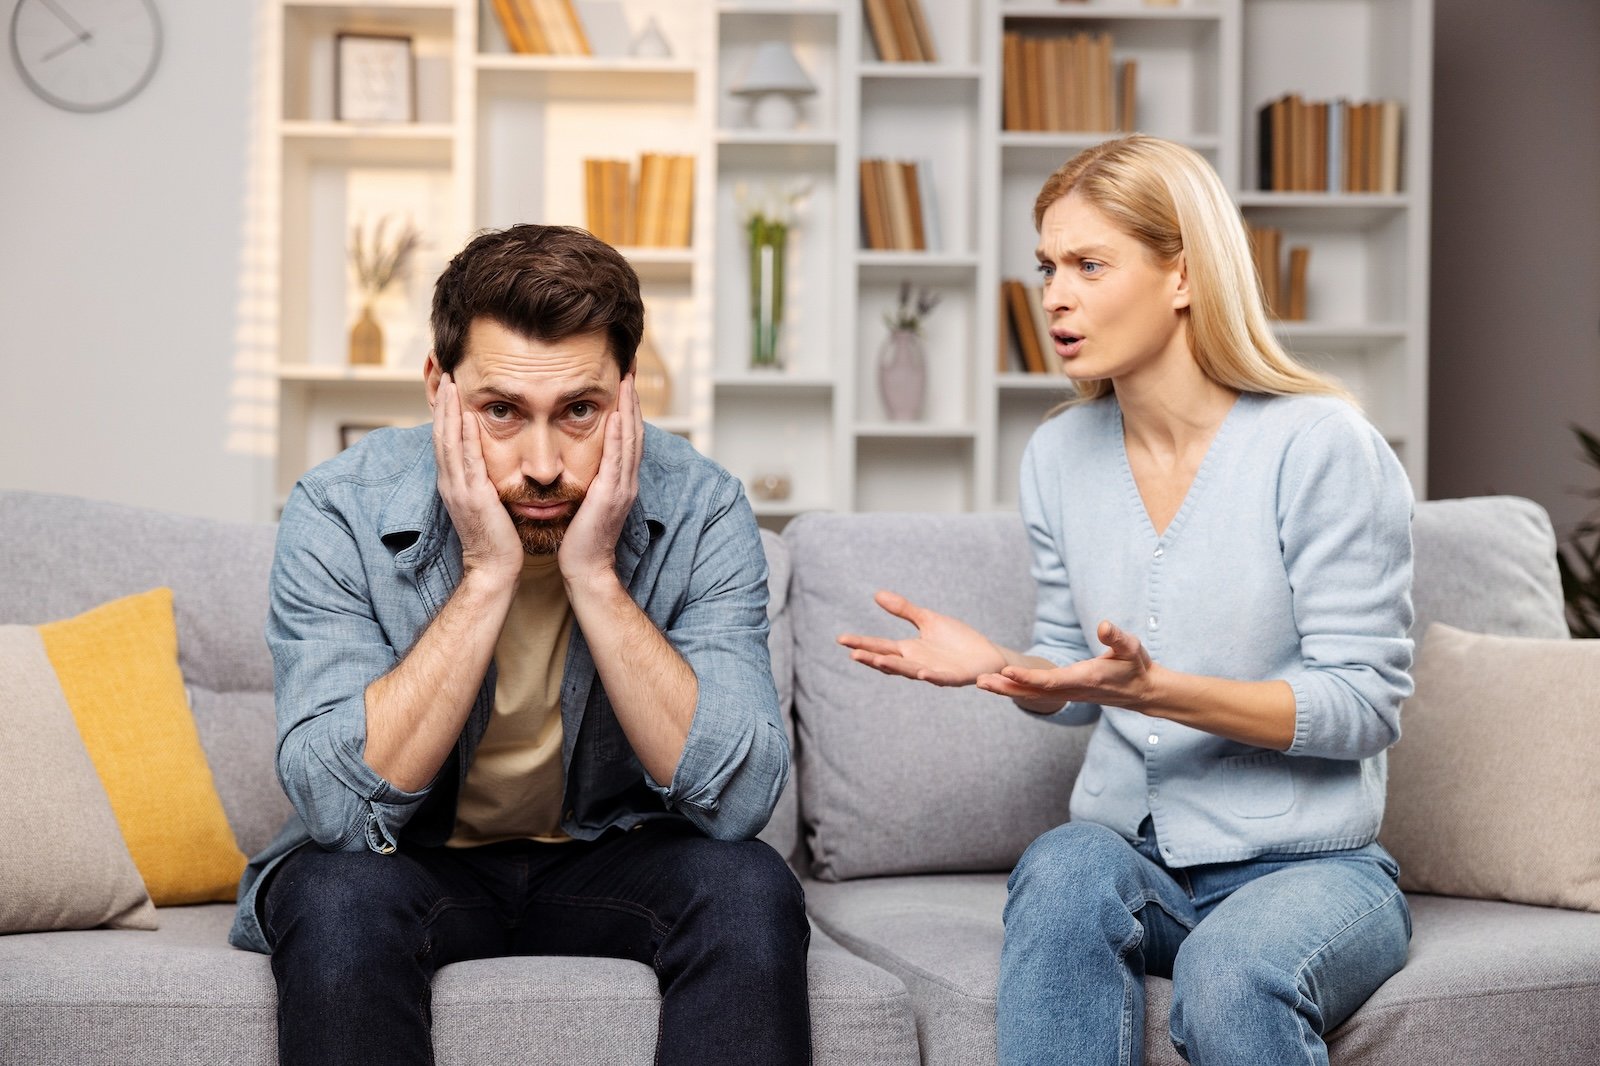 Assistance for troubled families concept. A furious wife yelling at her spouse, conflict erupting on the living room couch